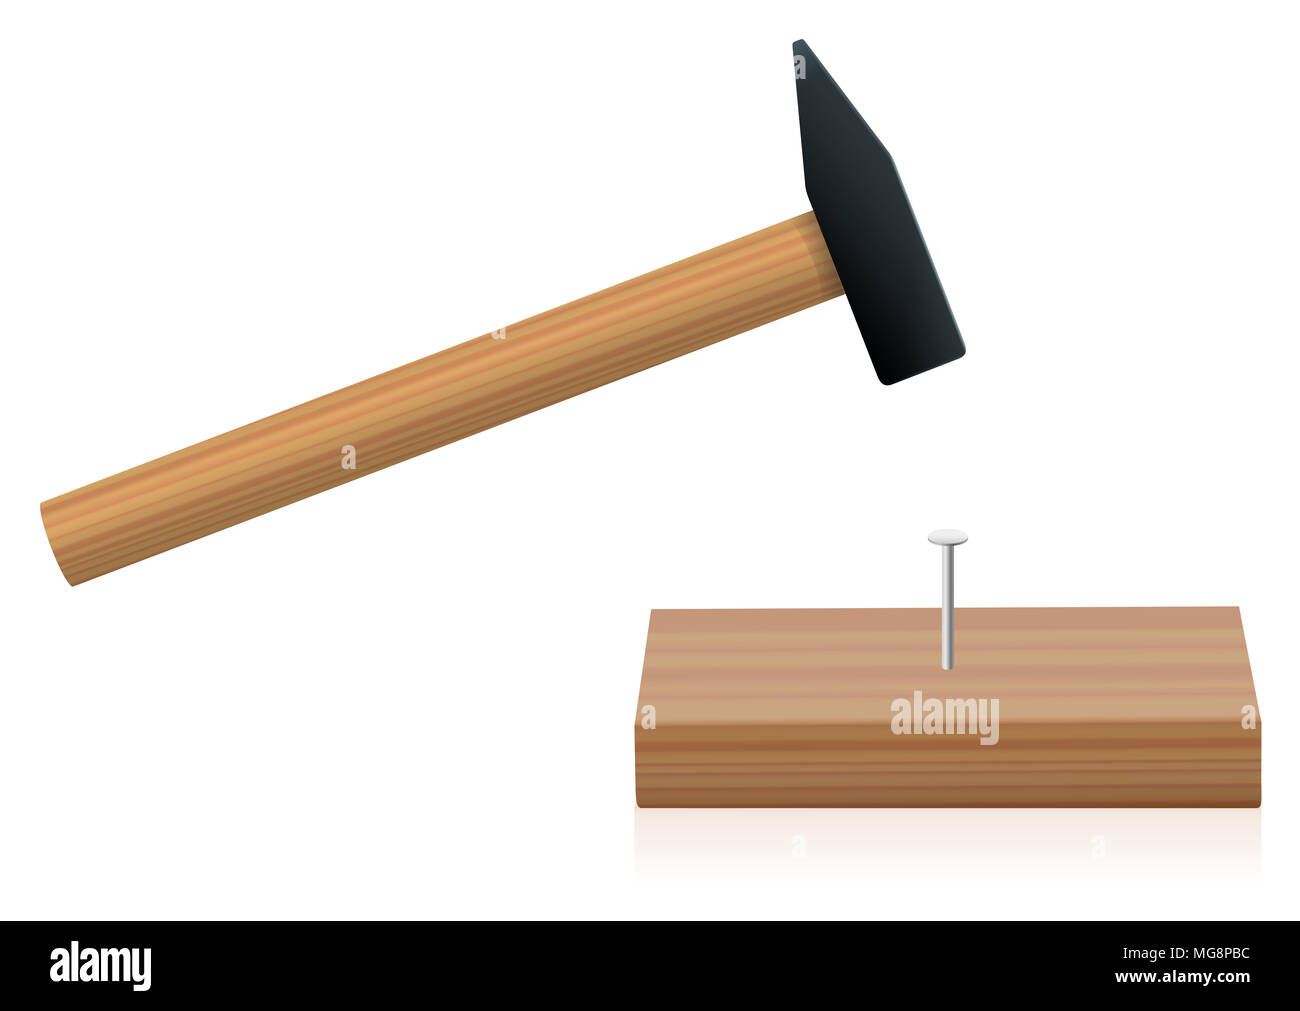 Hammer driving a nail into a plank - illustration on white background. Stock Photo